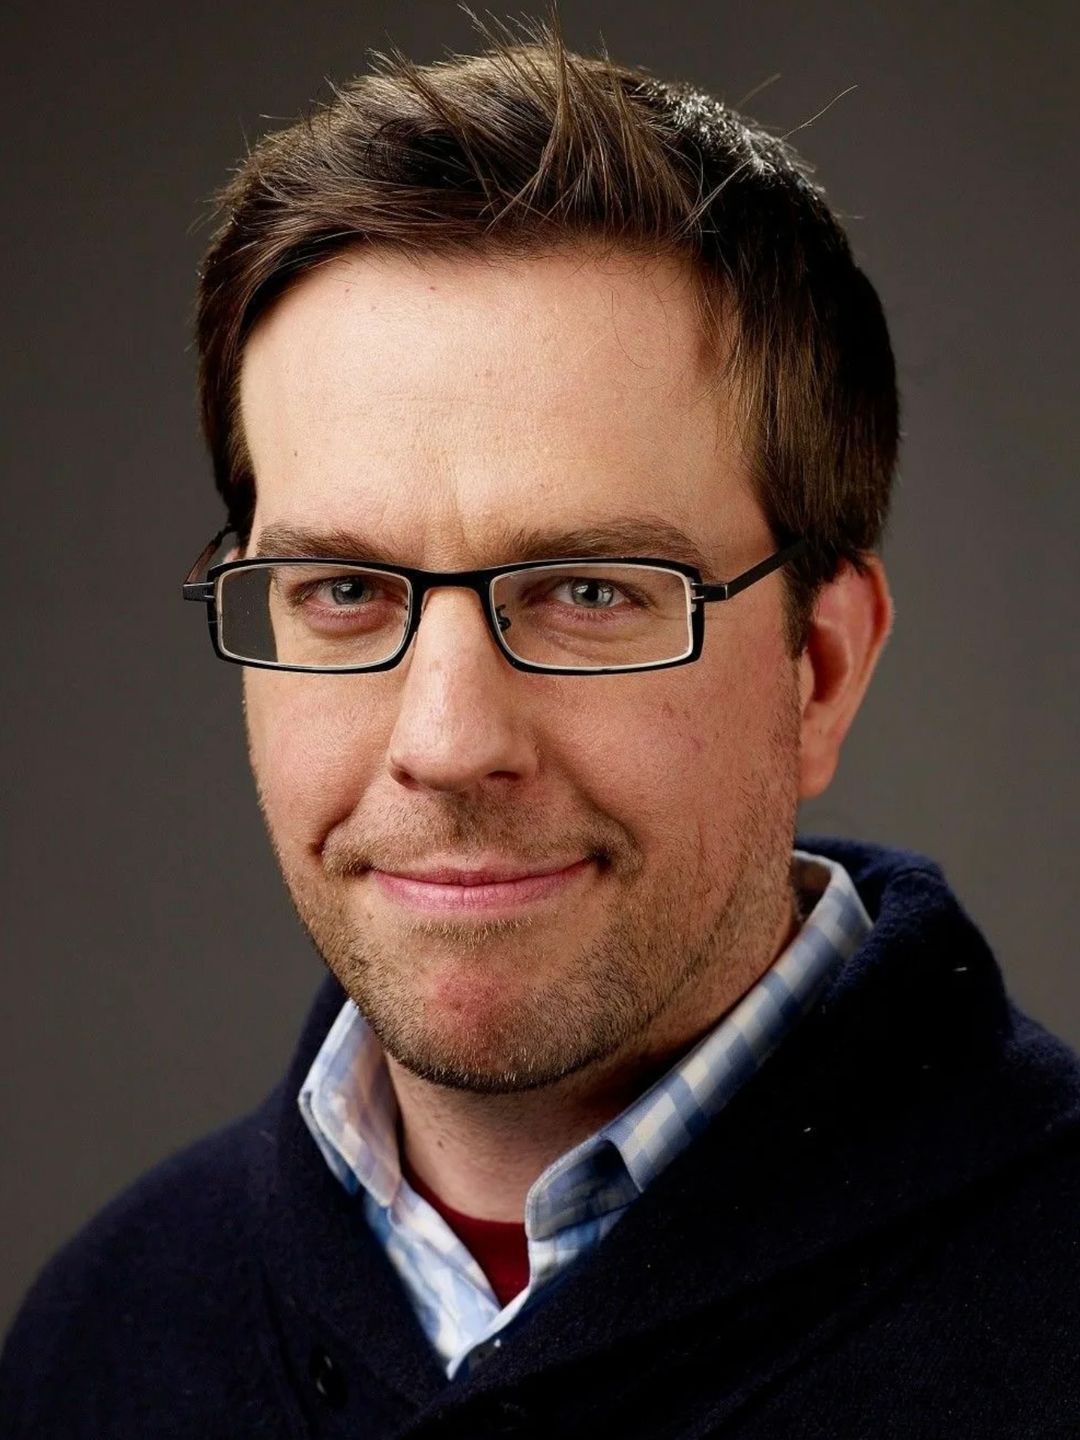 Ed Helms young age